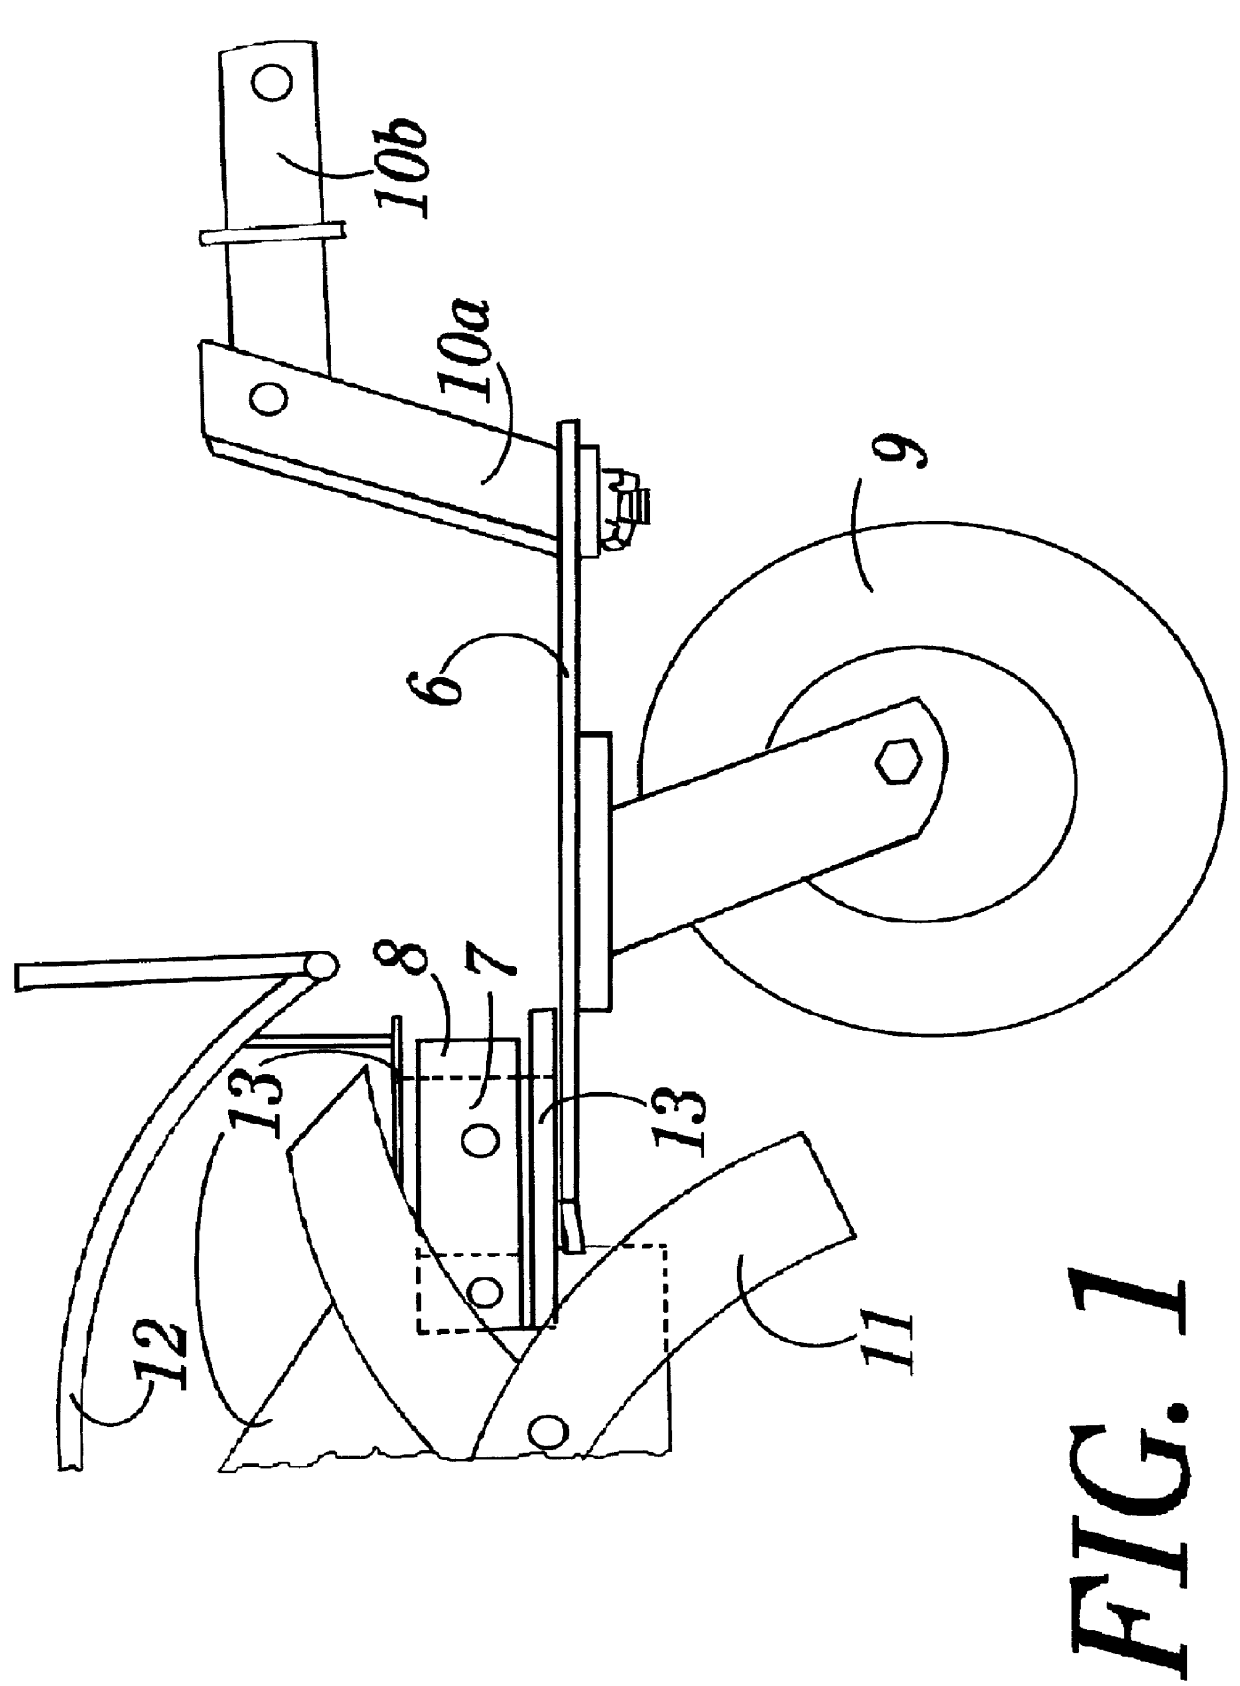 Rotary tiller attachment to facilitate towing